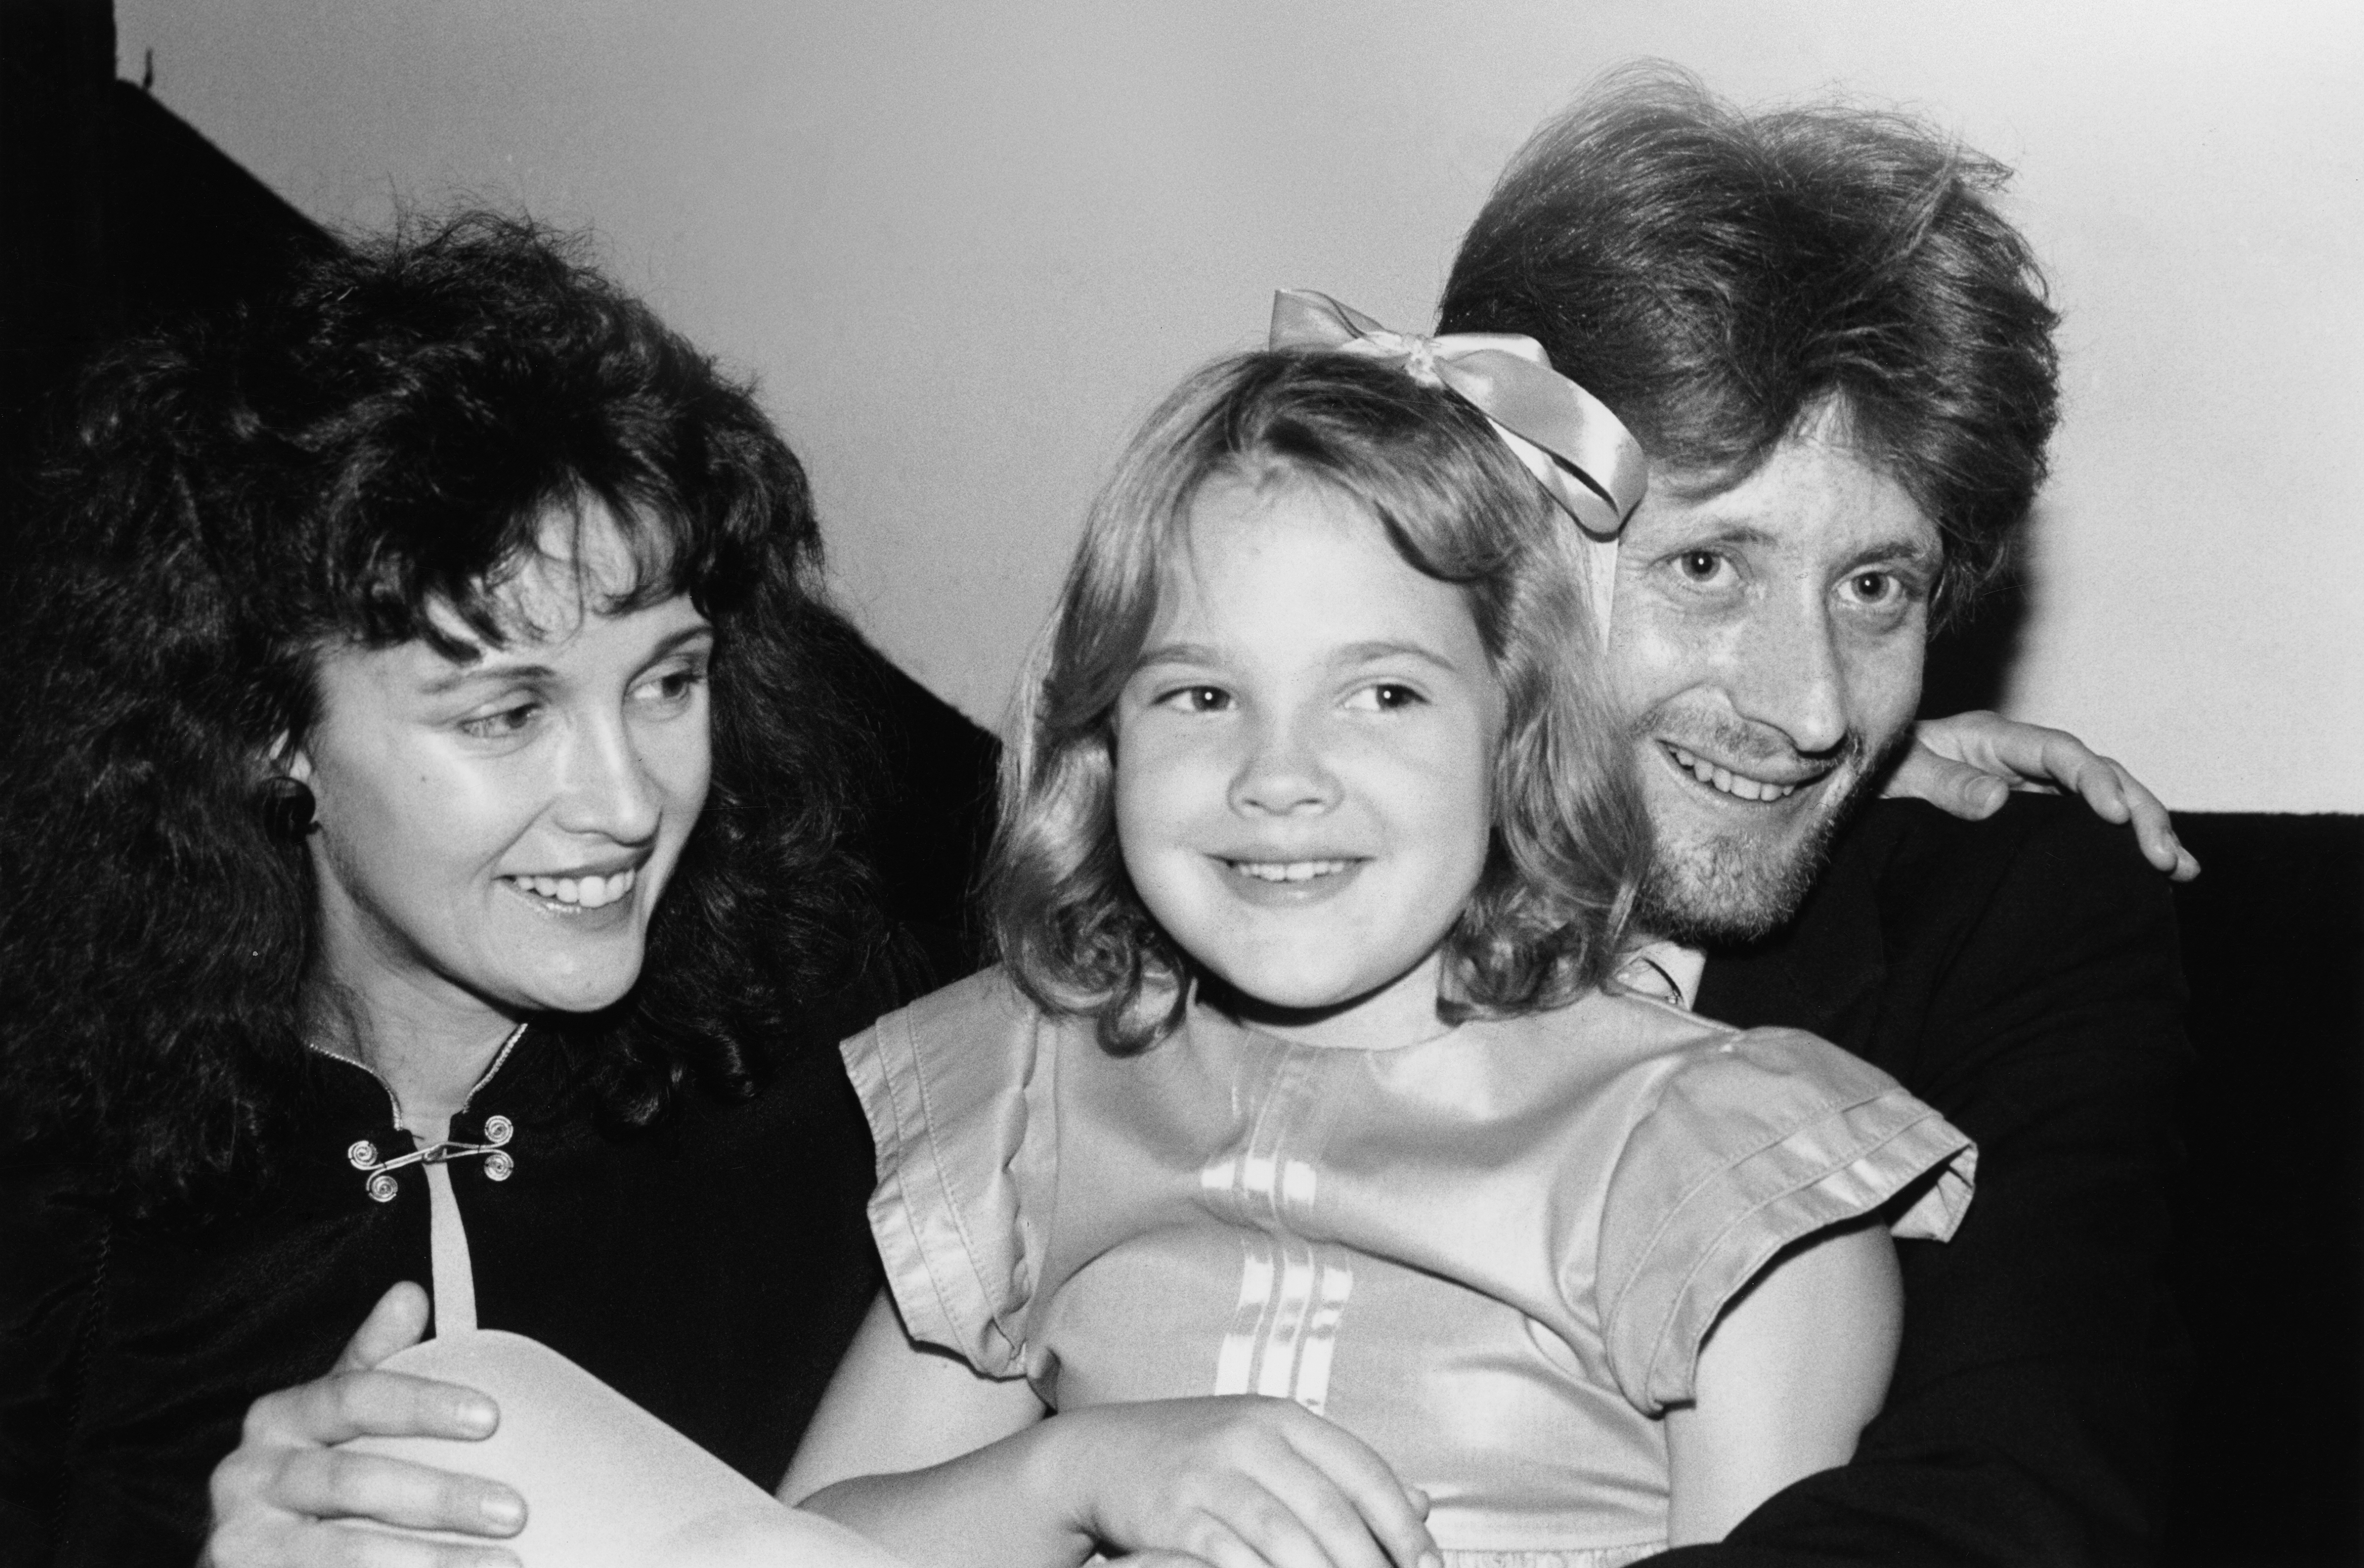 Drew Barrymore with her mother, Jaid Barrymore, and her half-brother, John Blyth Barrymore on June 6, 1982